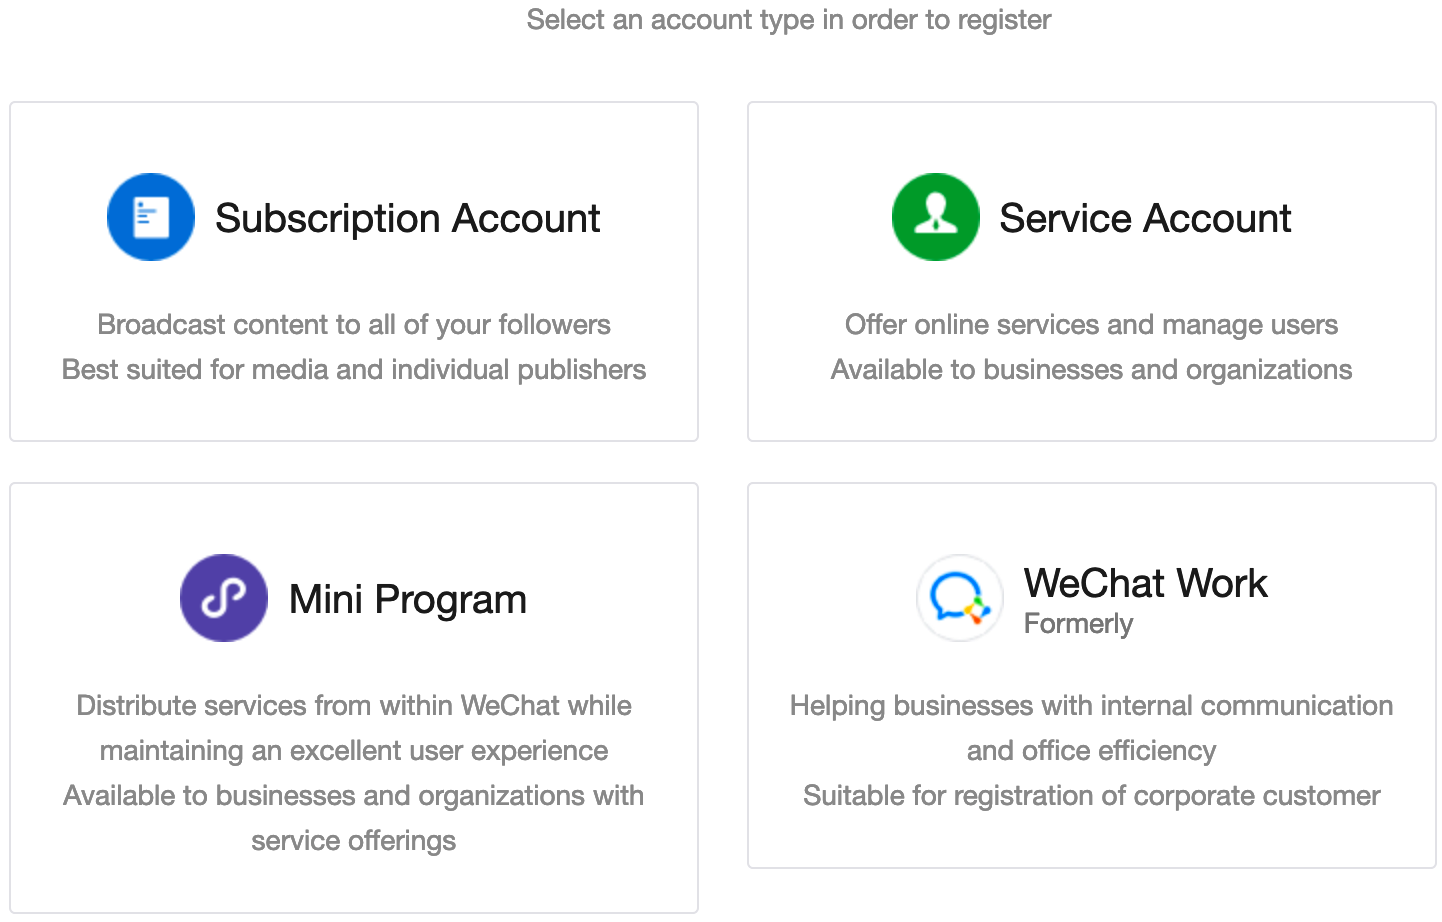 wechat official account safety guard